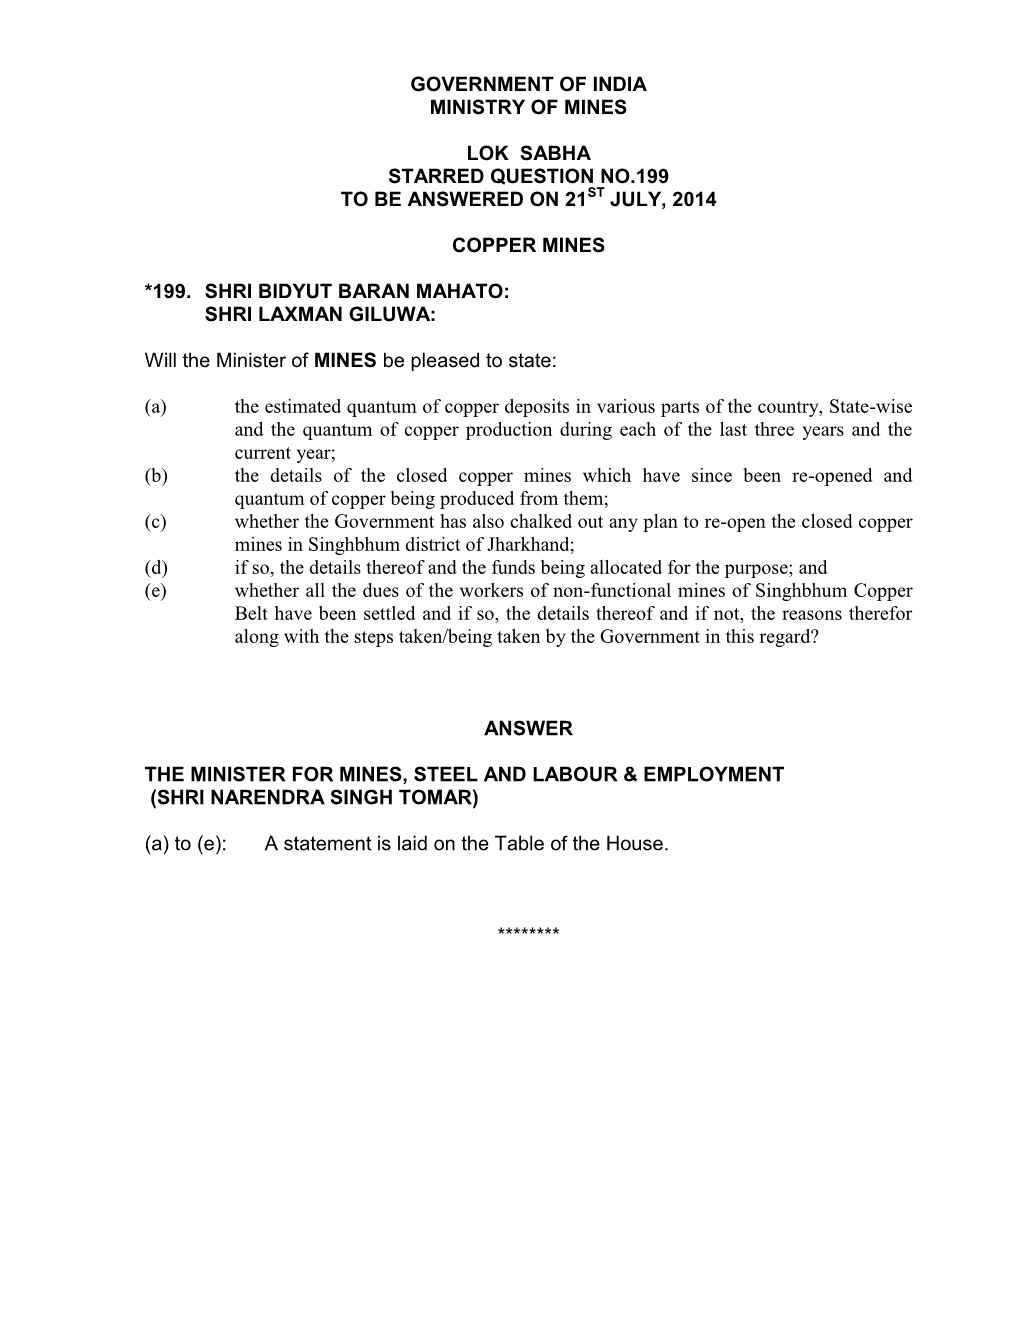 Lok Sabha Starred Question No.199 to Be Answered on 21St July, 2014